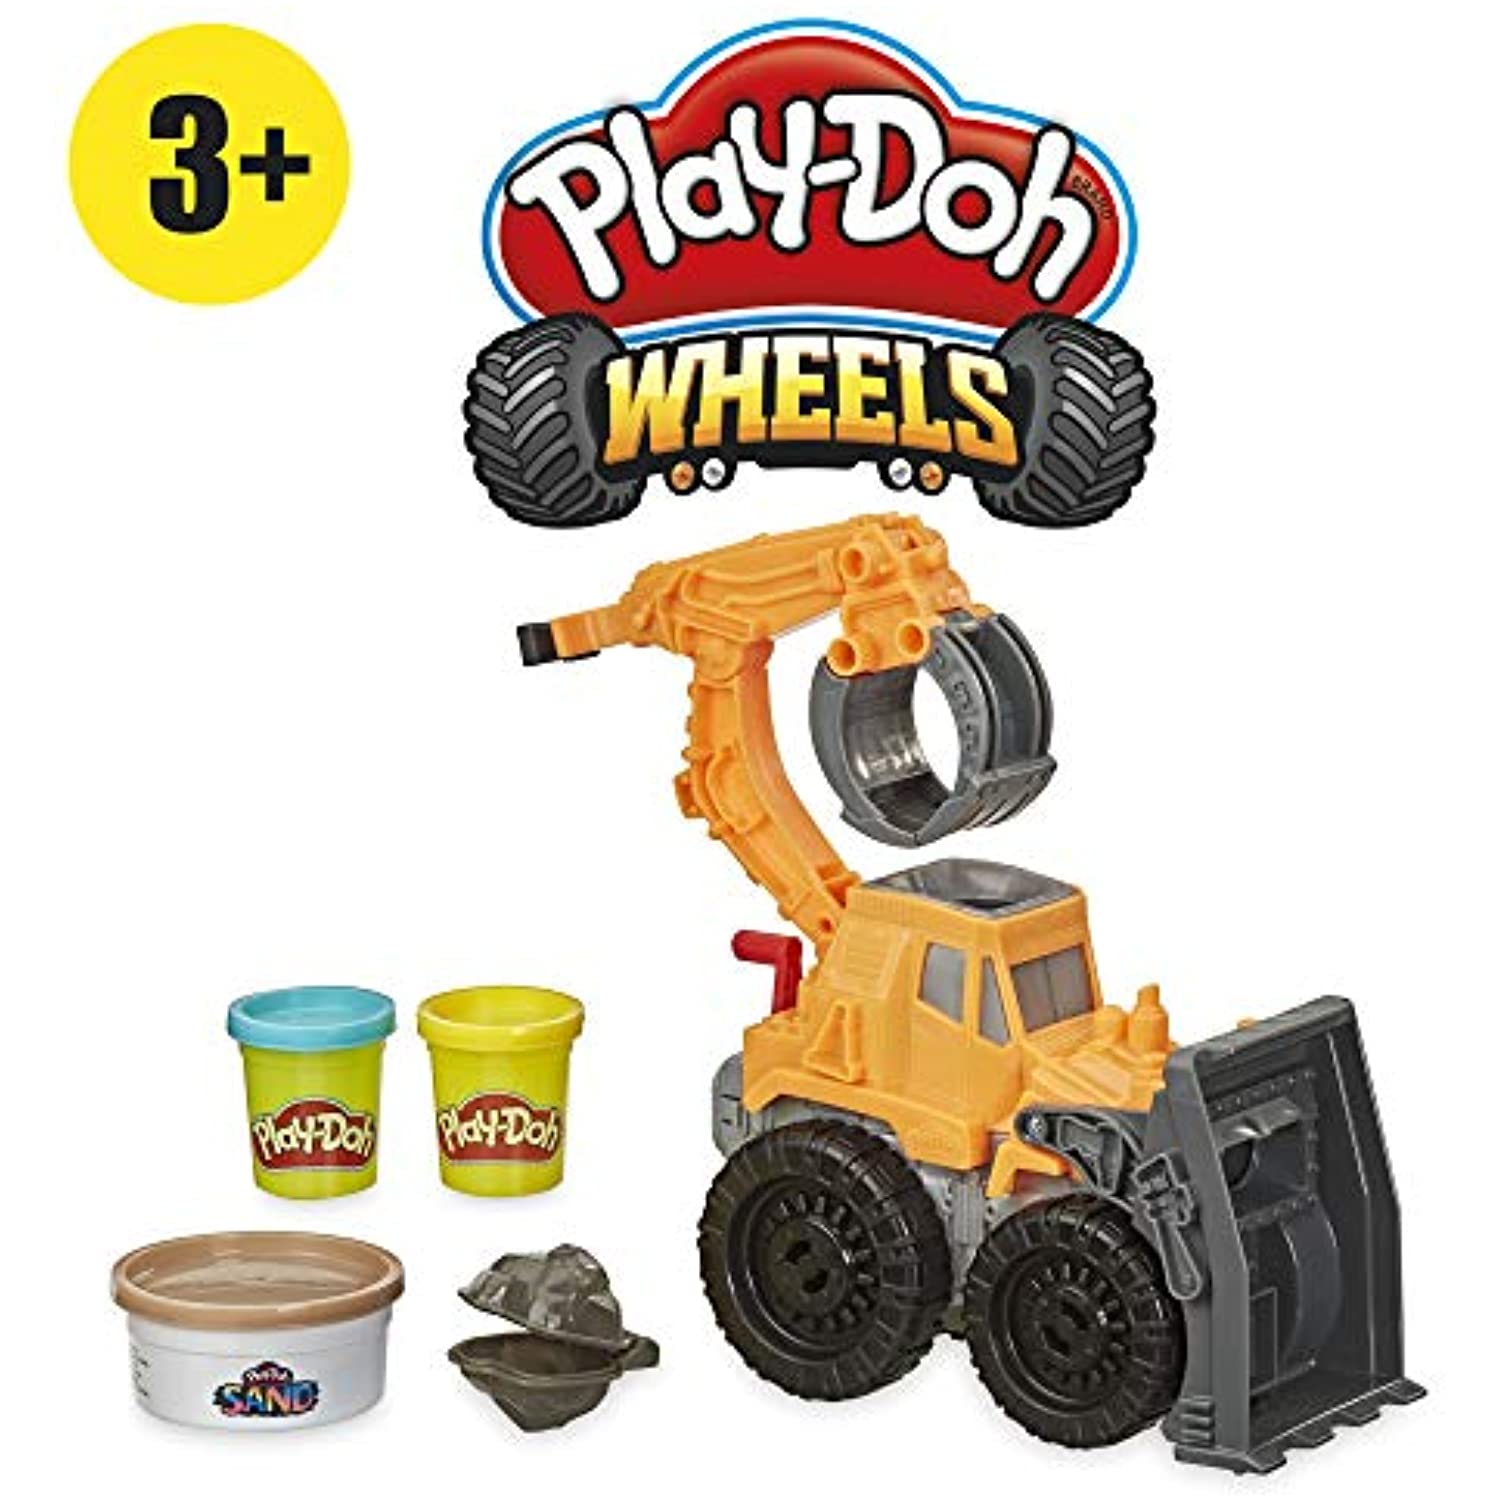 Play-Doh Wheels Front Loader Construction Set Toys - image 3 of 9